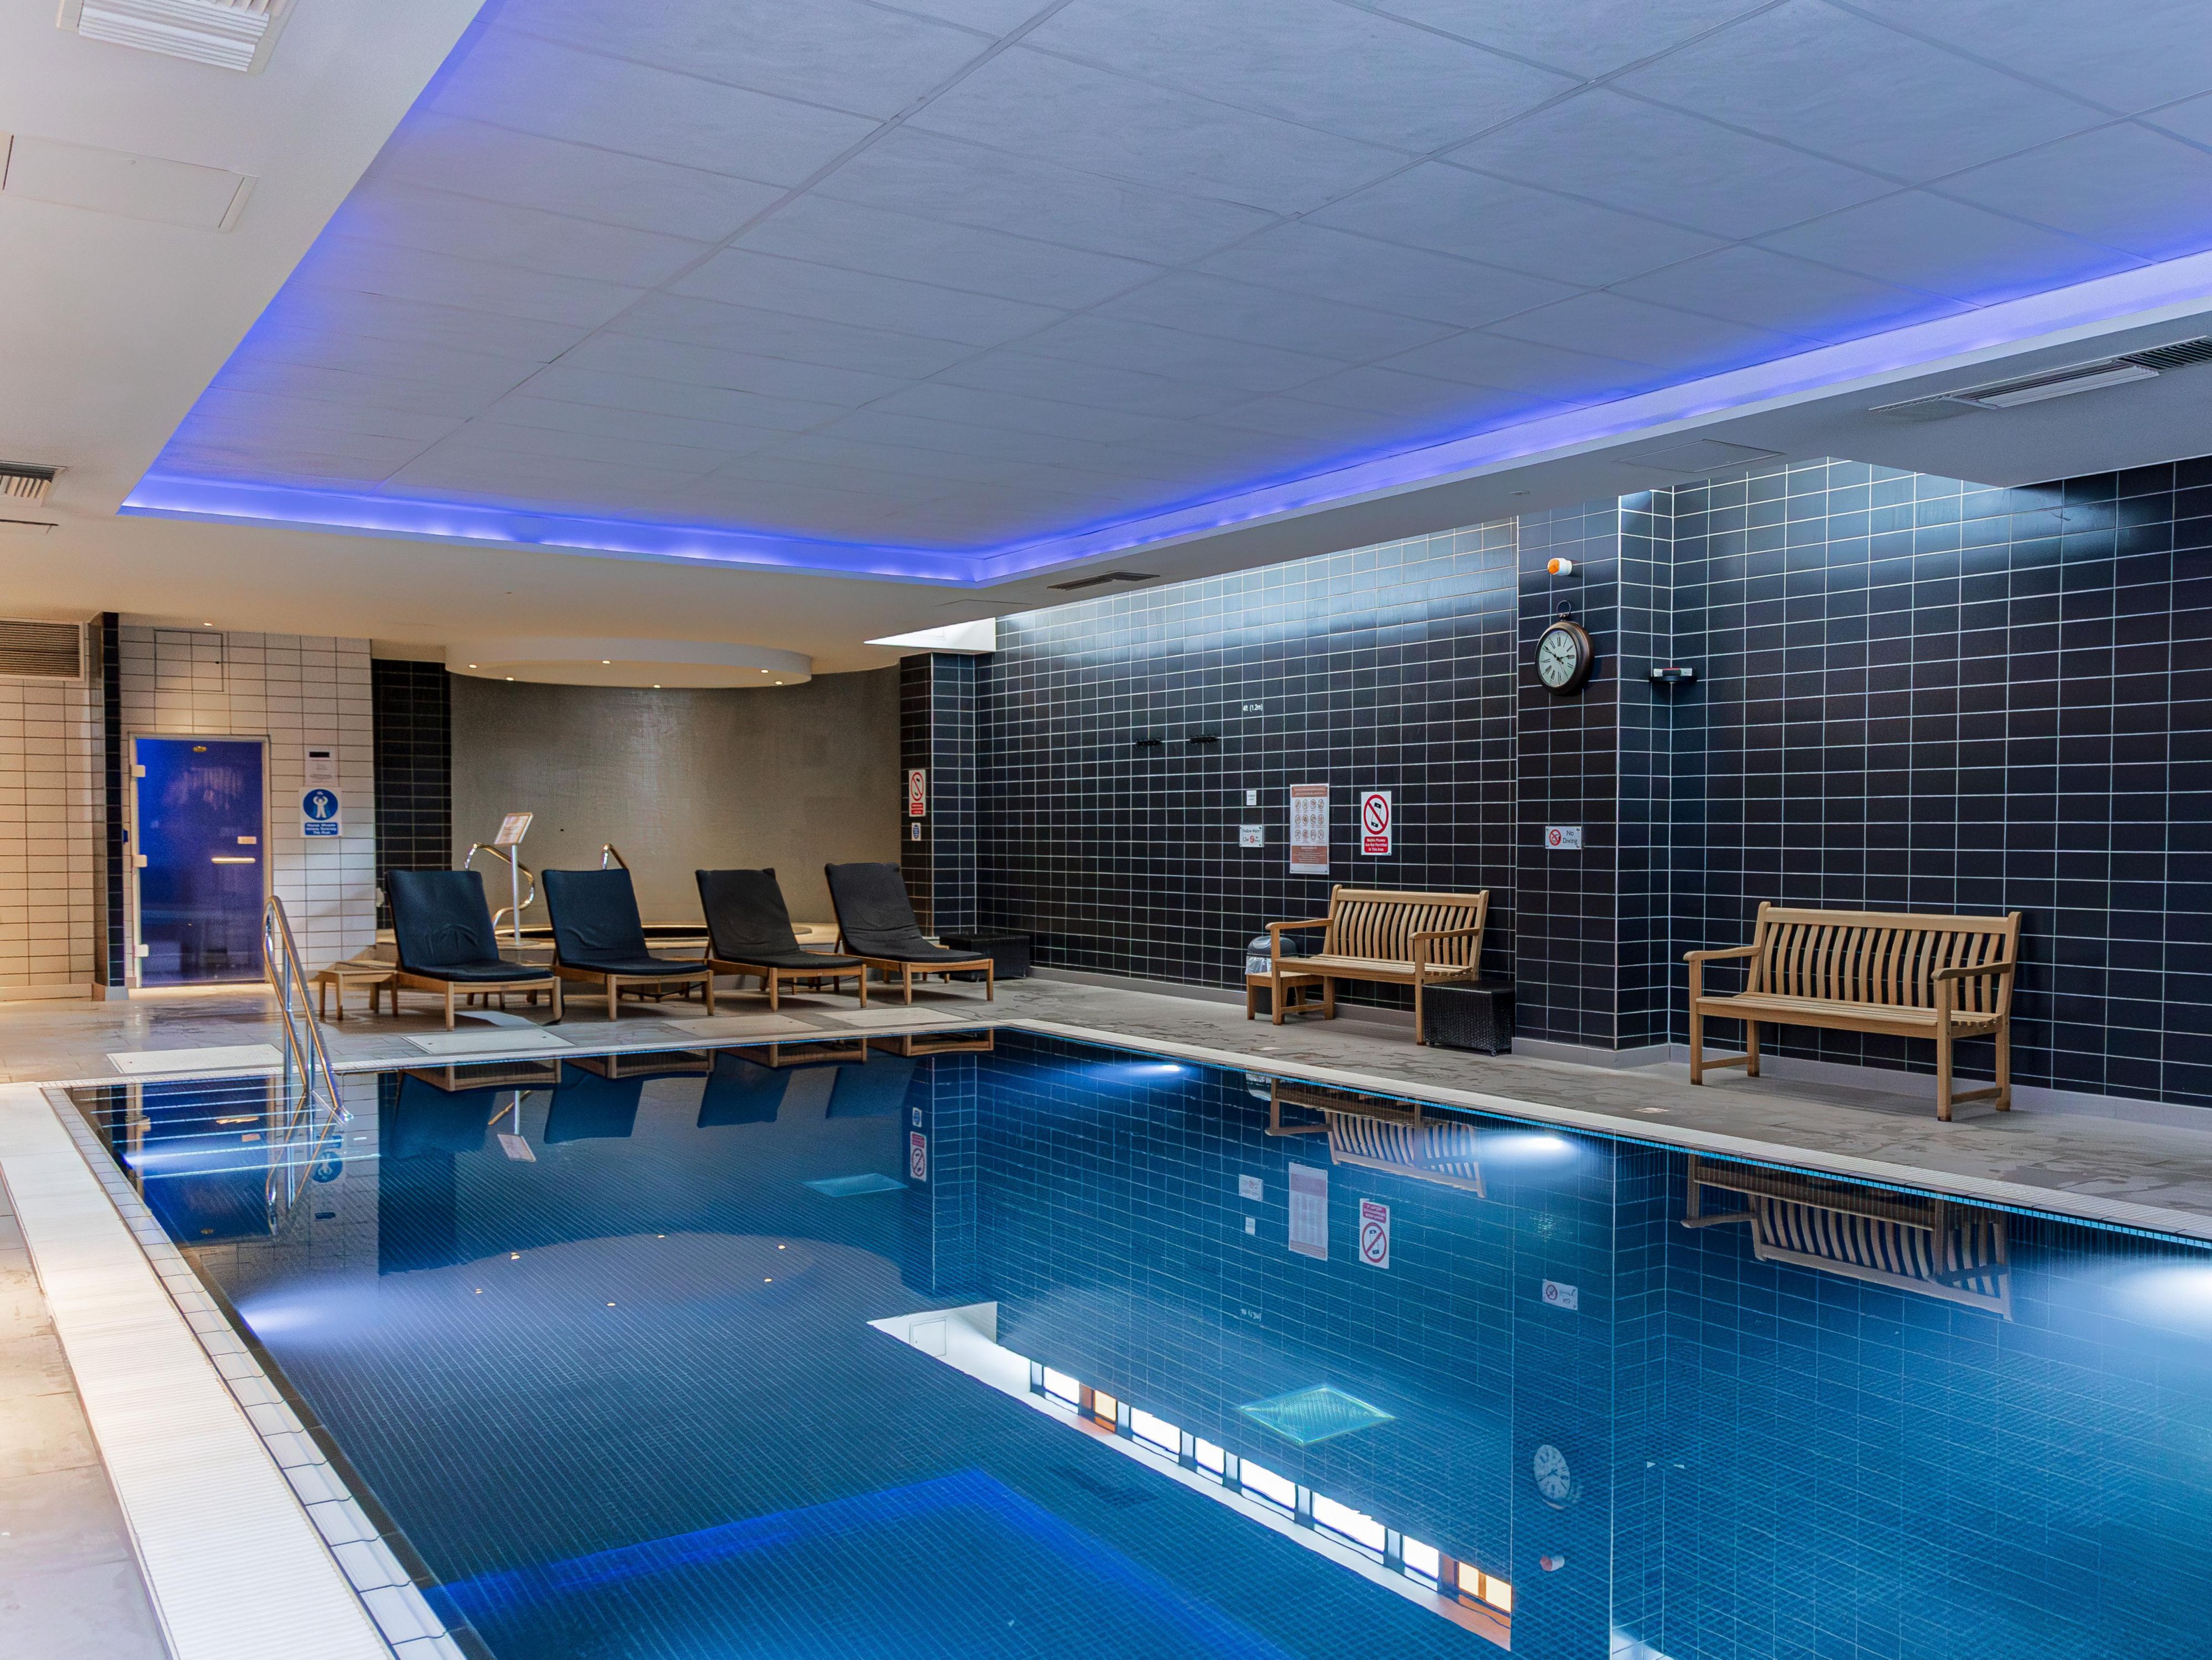 Experience pure rejuvenation at Mineral House Spa within Crowne Plaza Newcastle. Indulge in blissful spa treatments, maintain your fitness routine in our 24-hour gym, and take a refreshing dip in the sparkling swimming pool. Discover a holistic wellness haven in the heart of Newcastle.